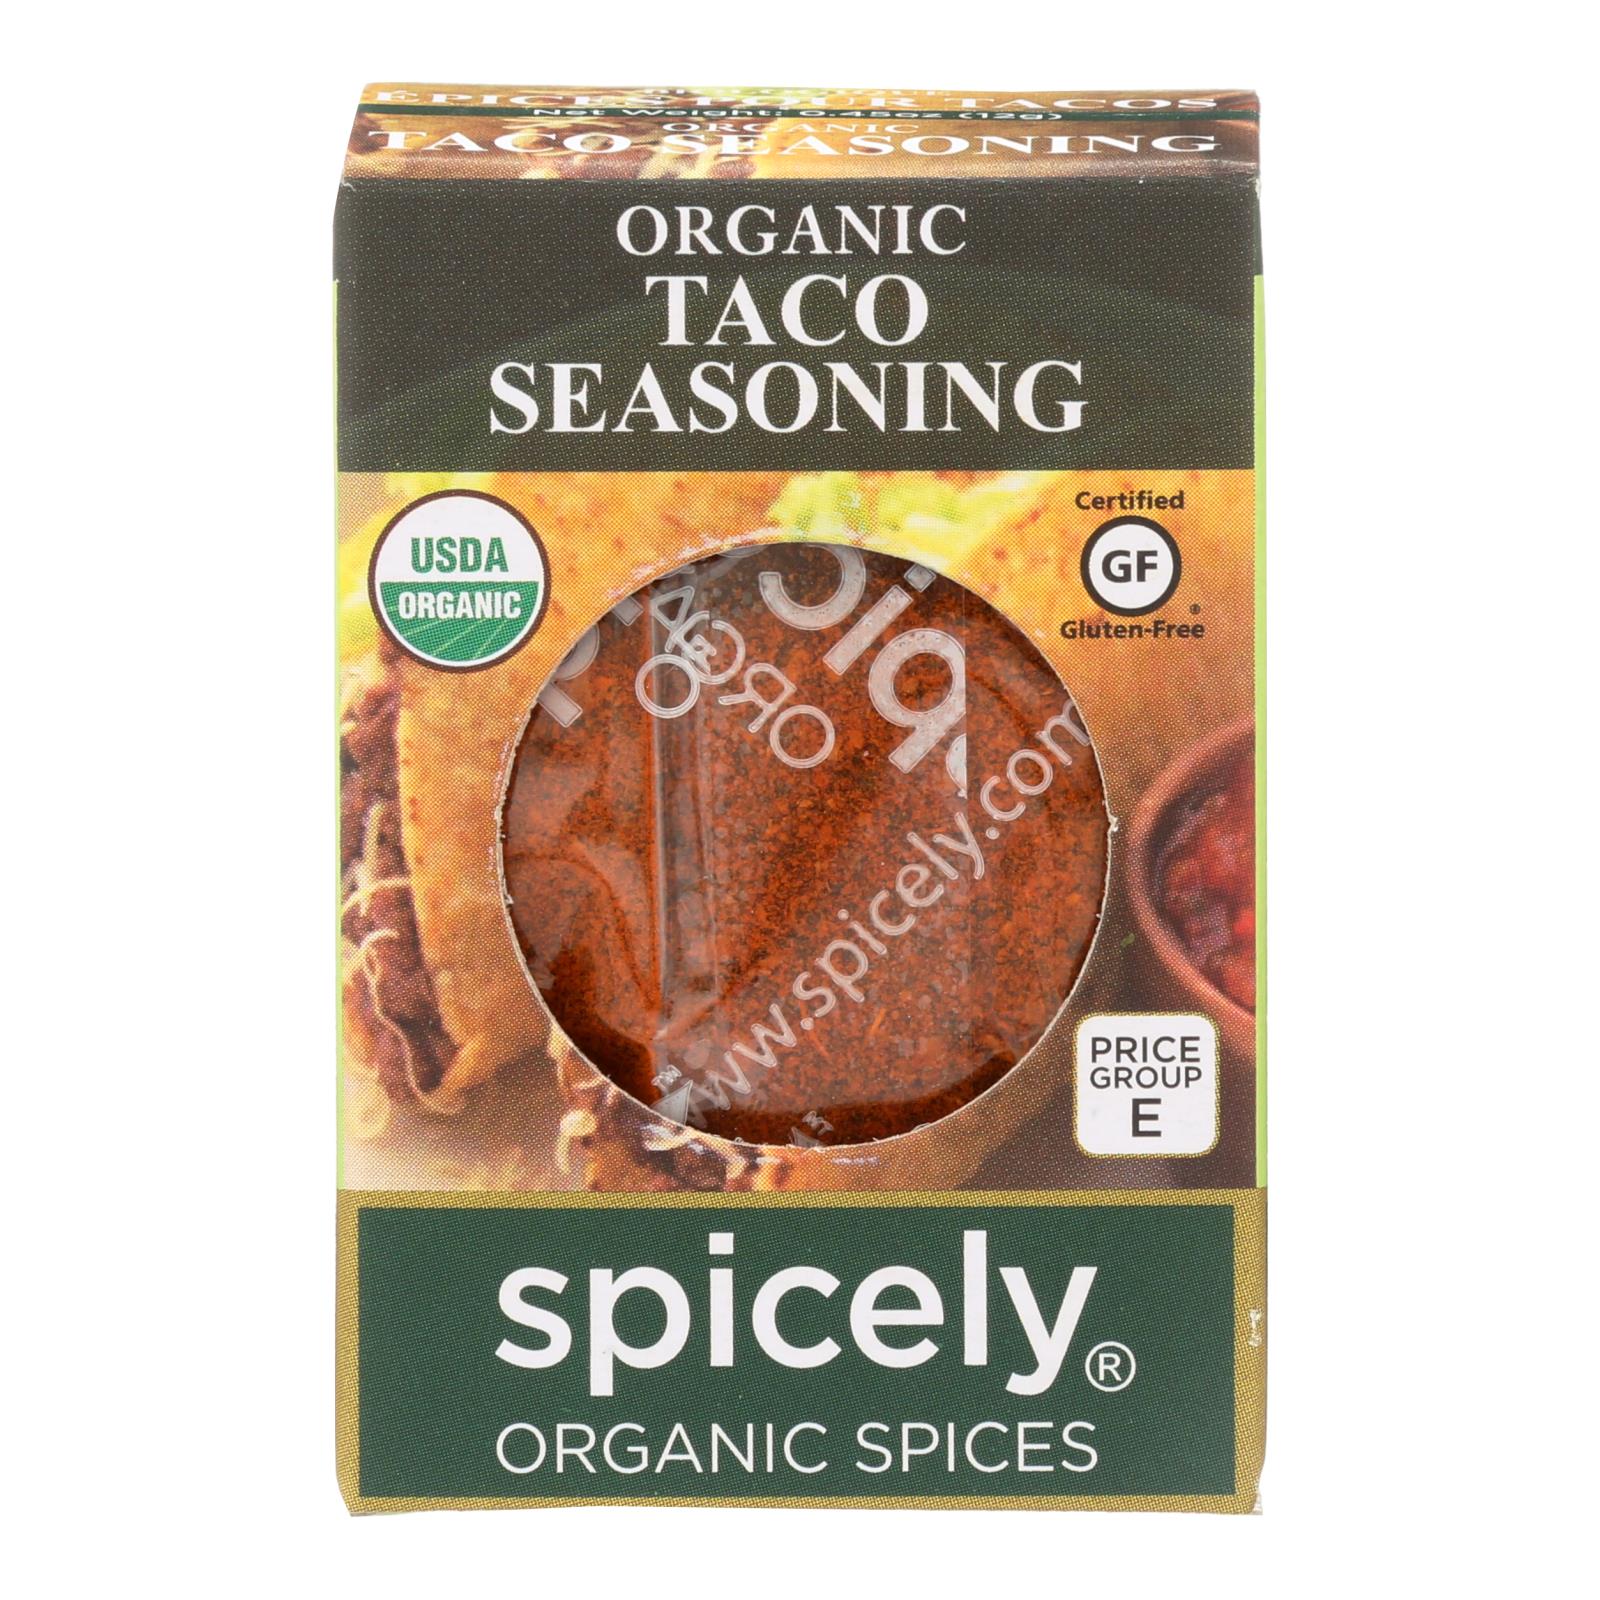 Spicely Organics - Organic Taco Seasoning - Case Of 6 - 0.45 Oz. - OnlyNaturals